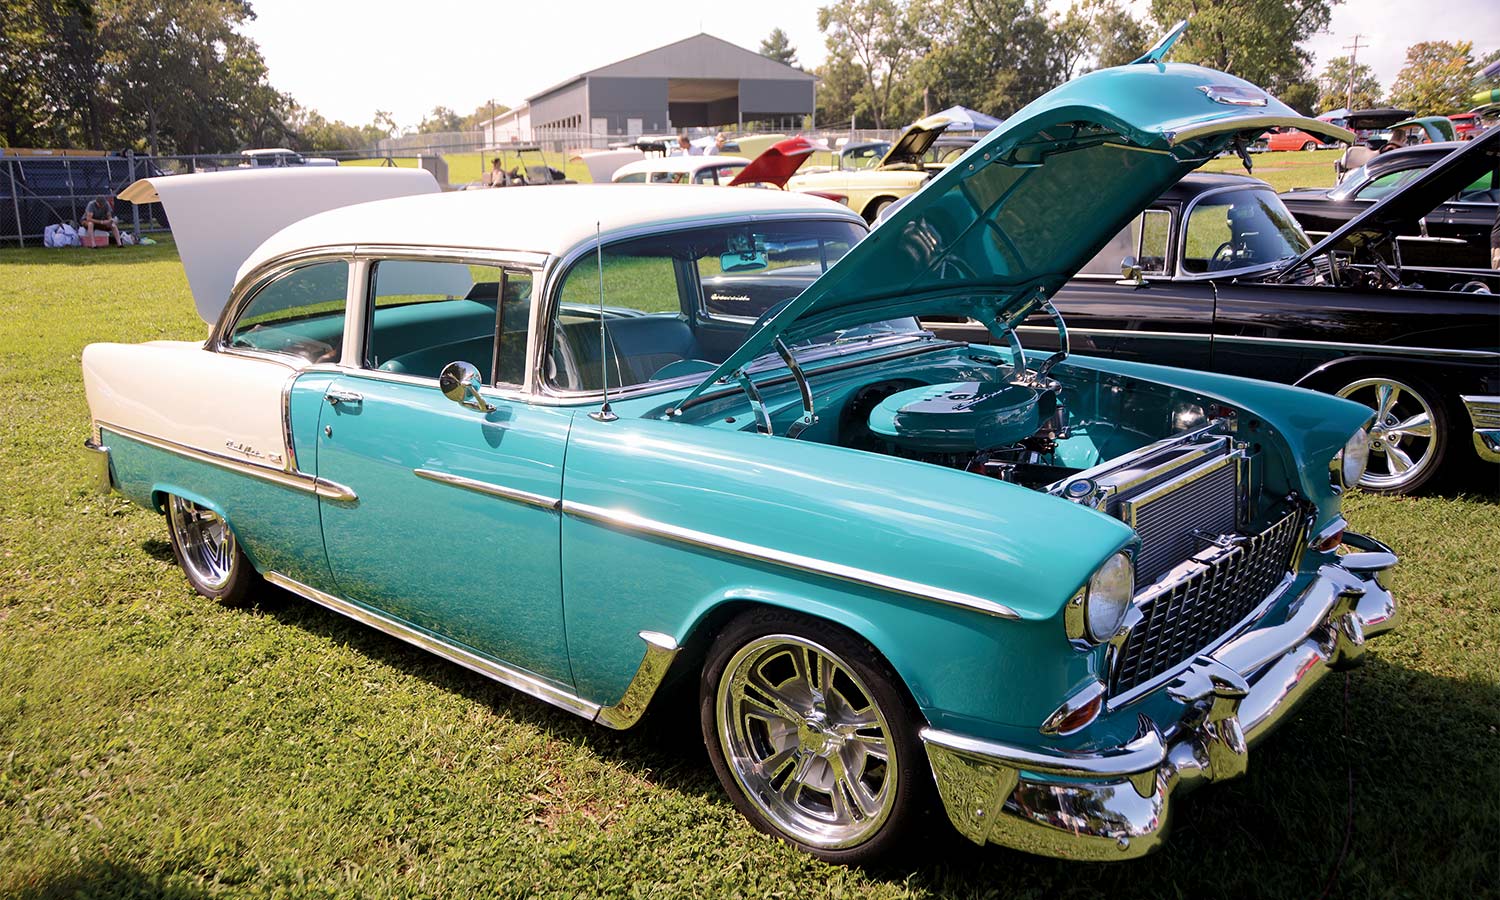 Light blue and white ’55 Bel Air